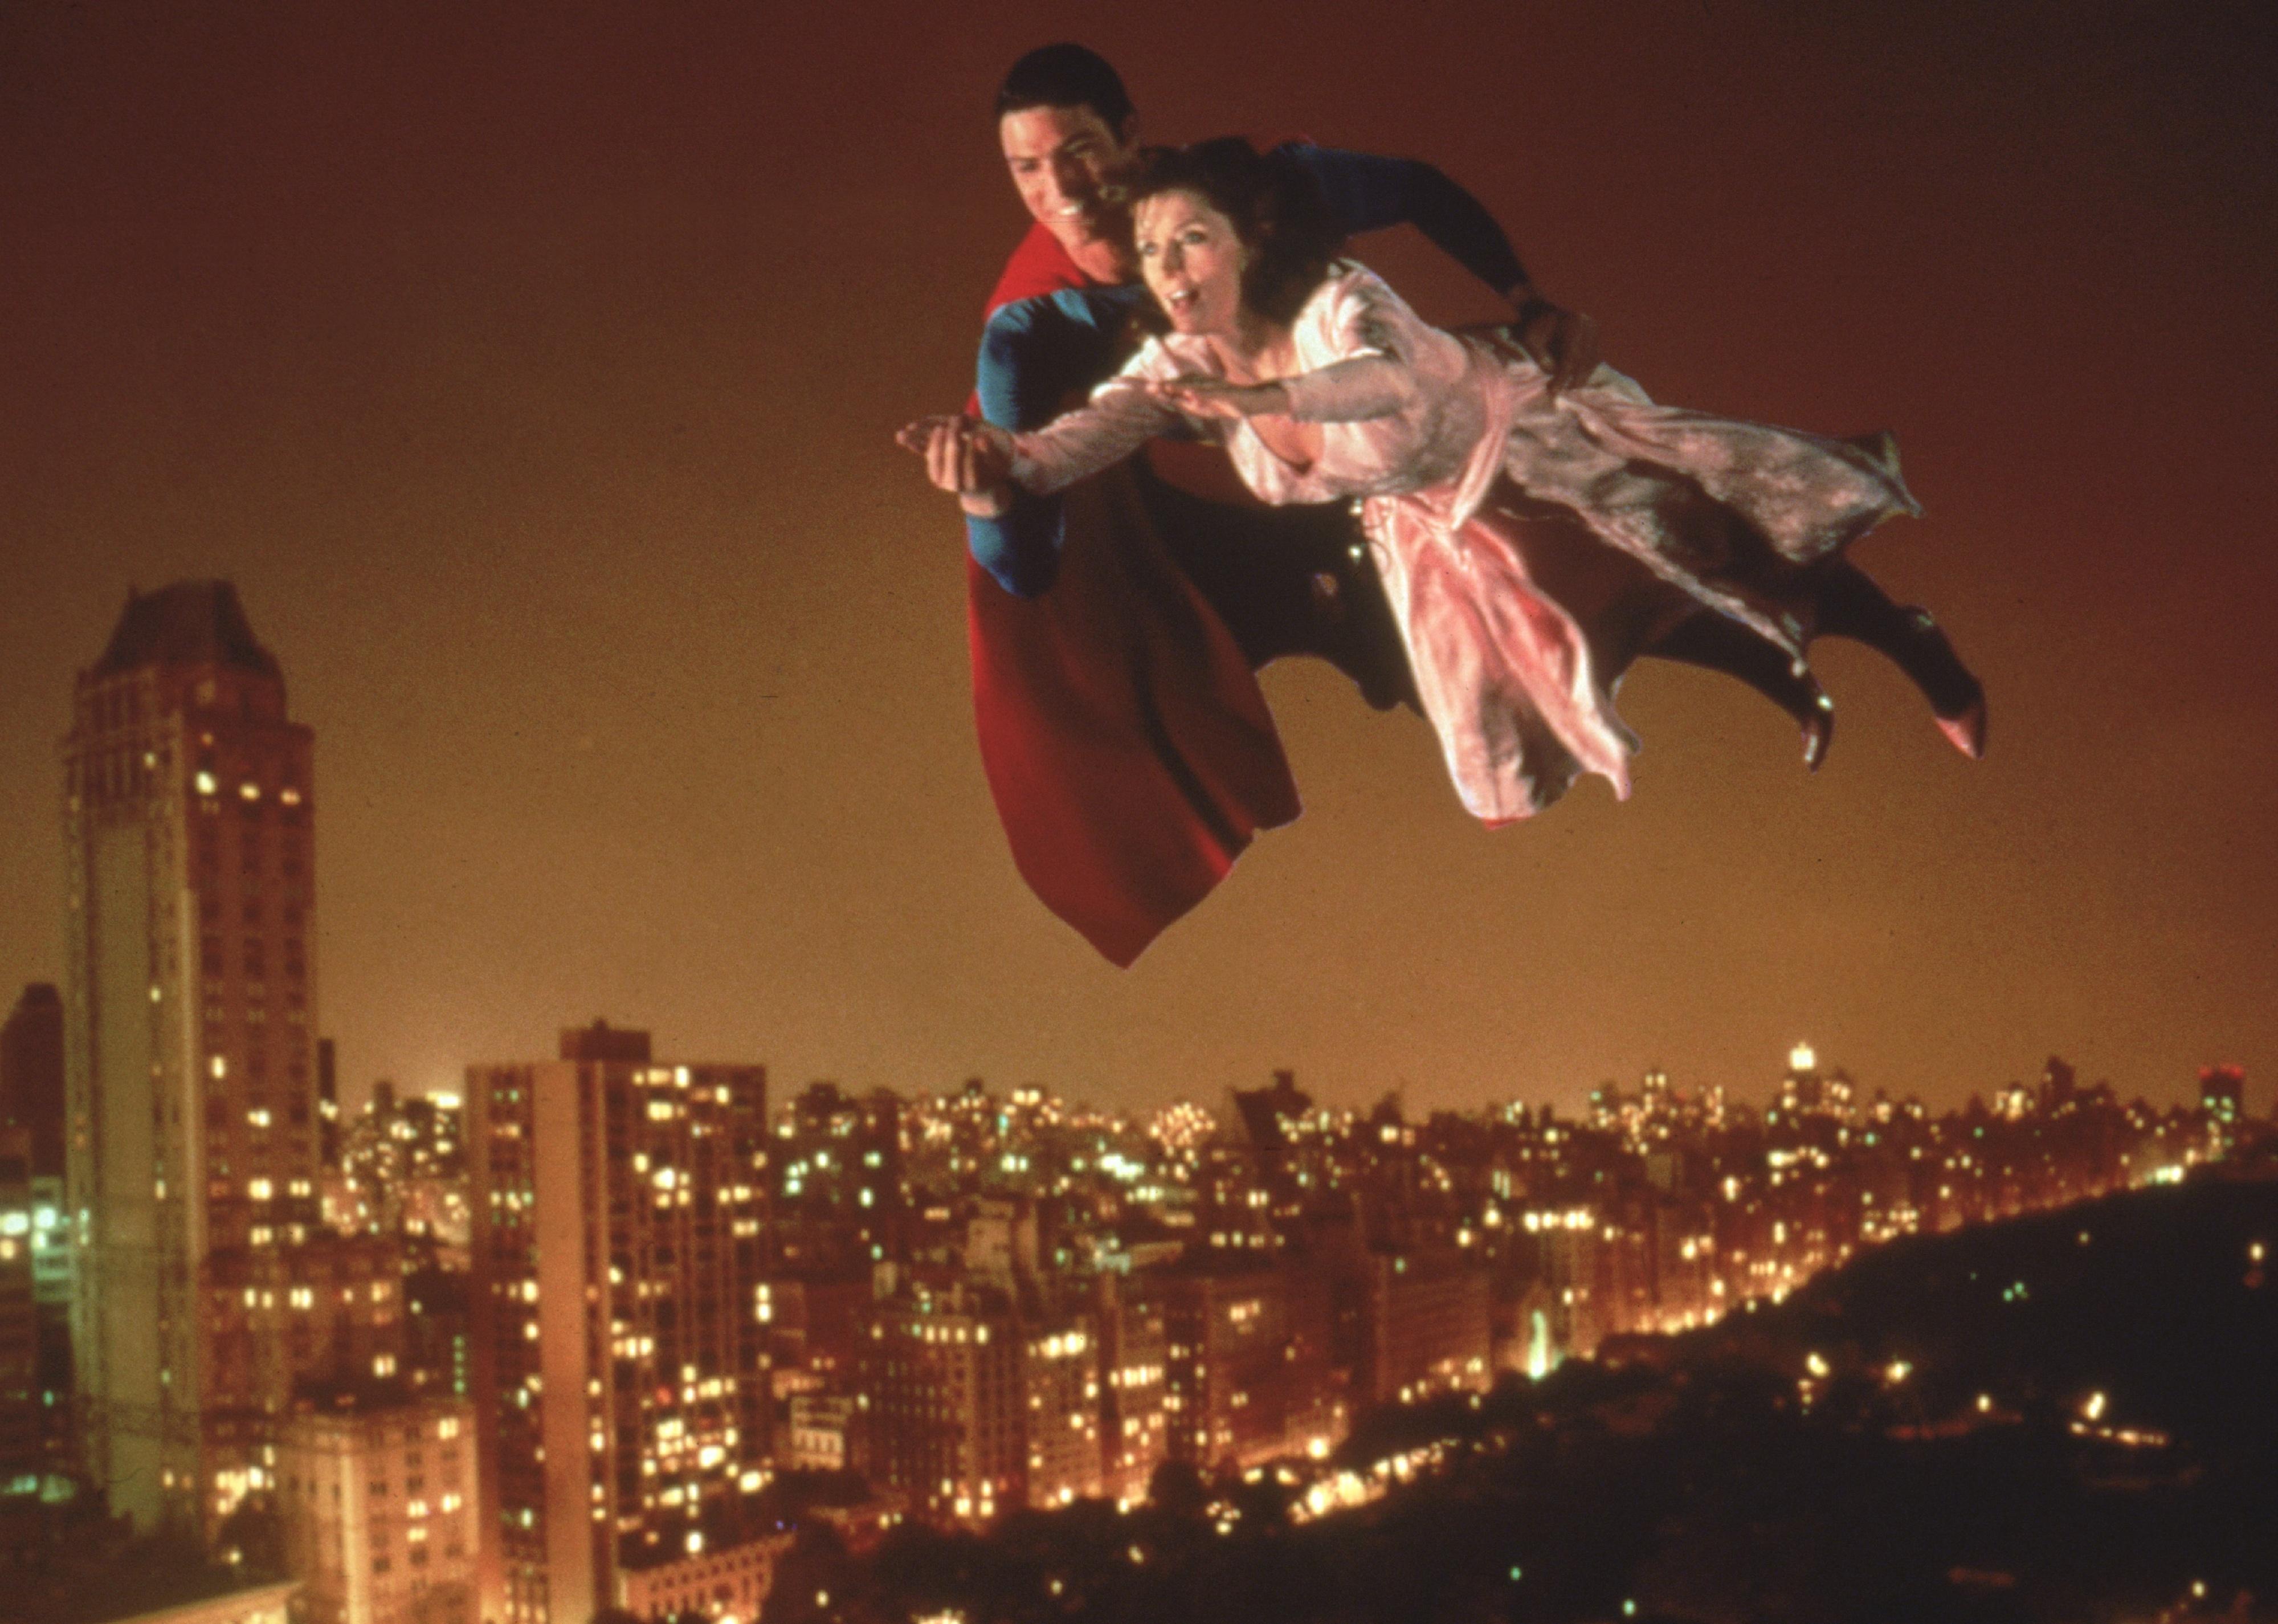 Christopher Reeve and Margot Kidder flying over a city at night.